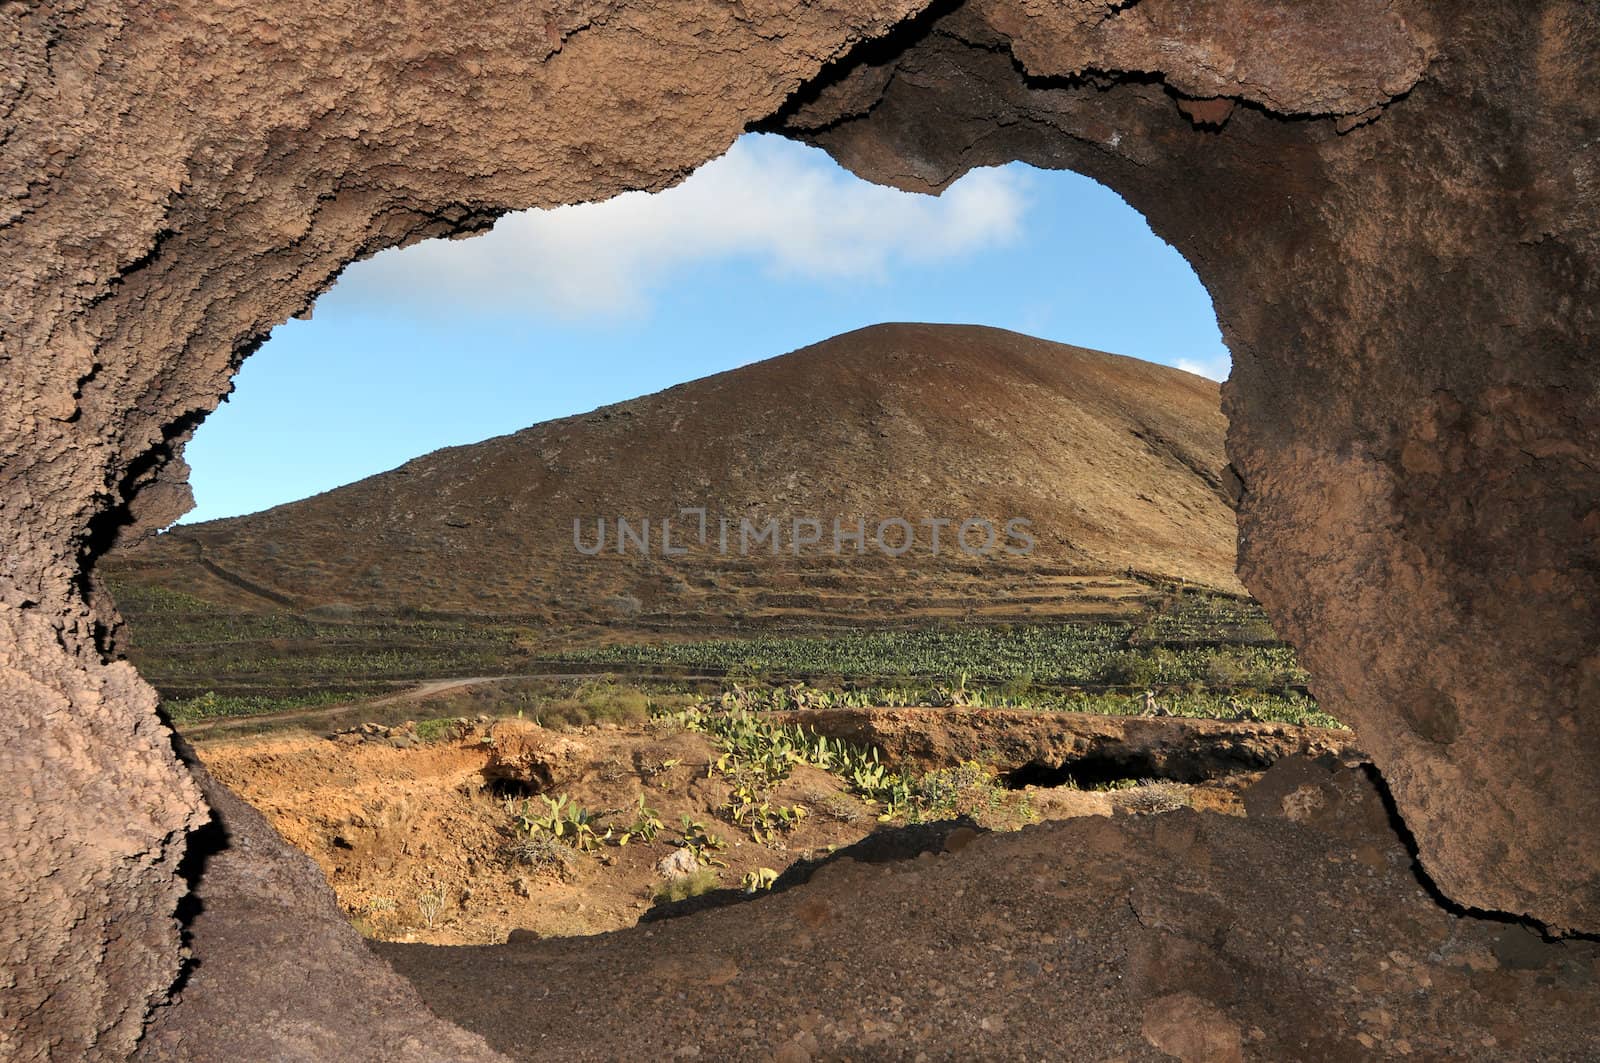 Cave near a volcano in the desert in spain